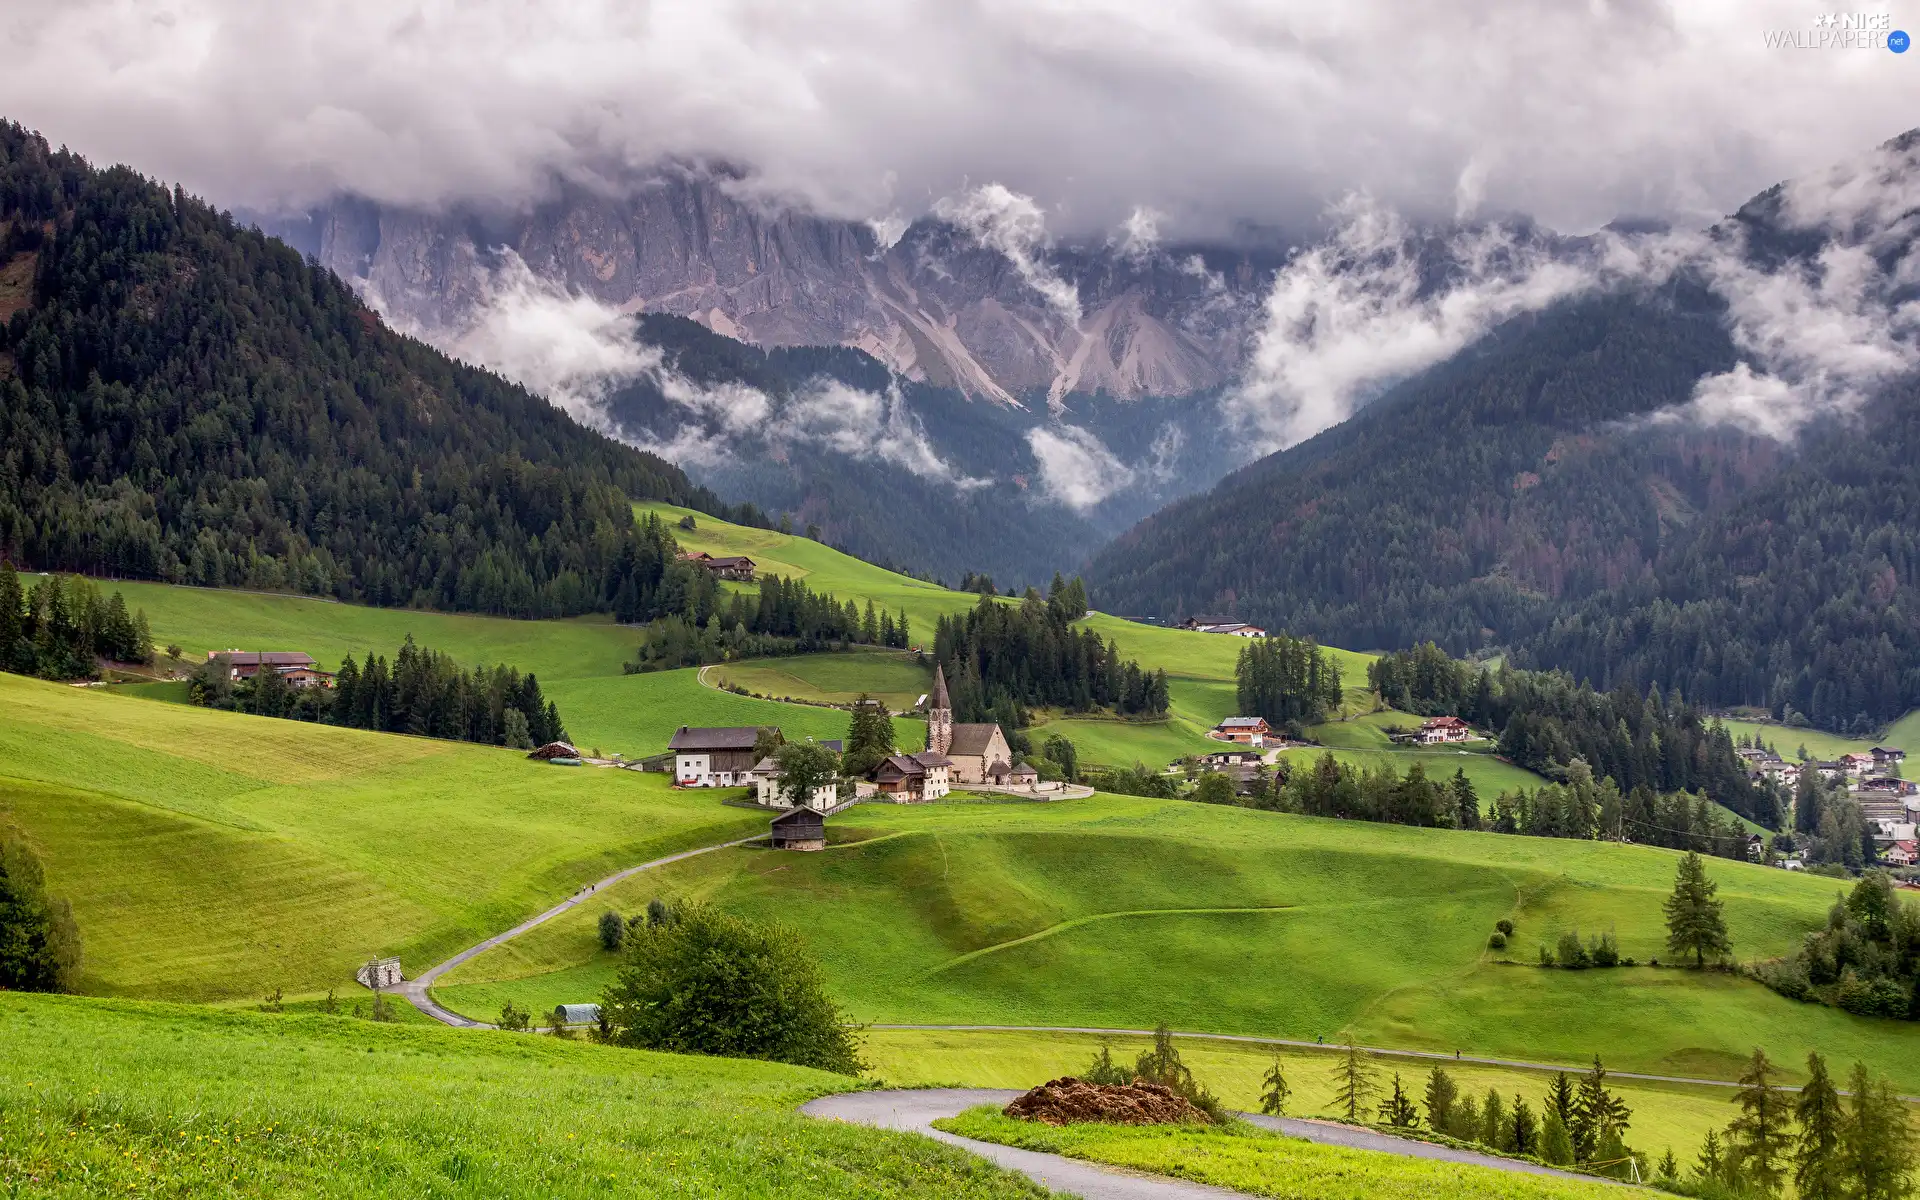 trees, South Tyrol, country, Italy, Fog, woods, Santa Maddalena, Houses, Church, clouds, Dolomites, Mountains, Way, viewes